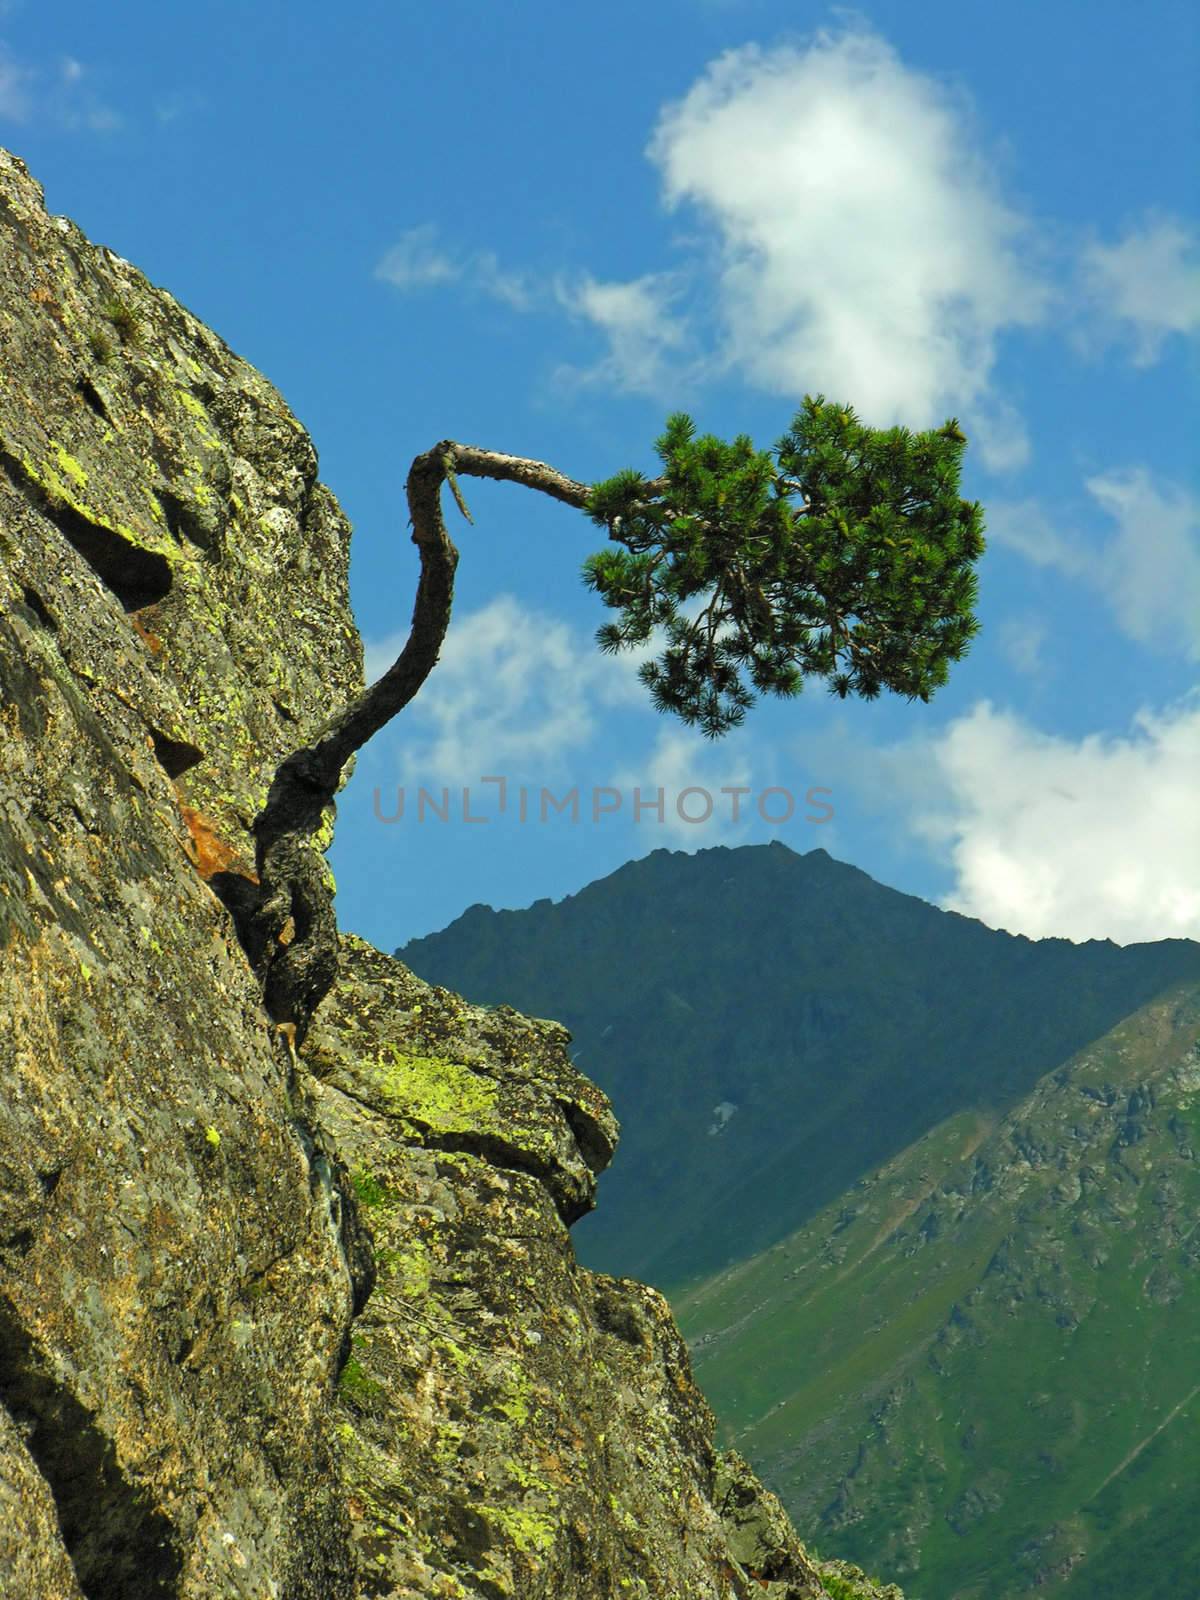 The bent tree growing at edge of a rock
